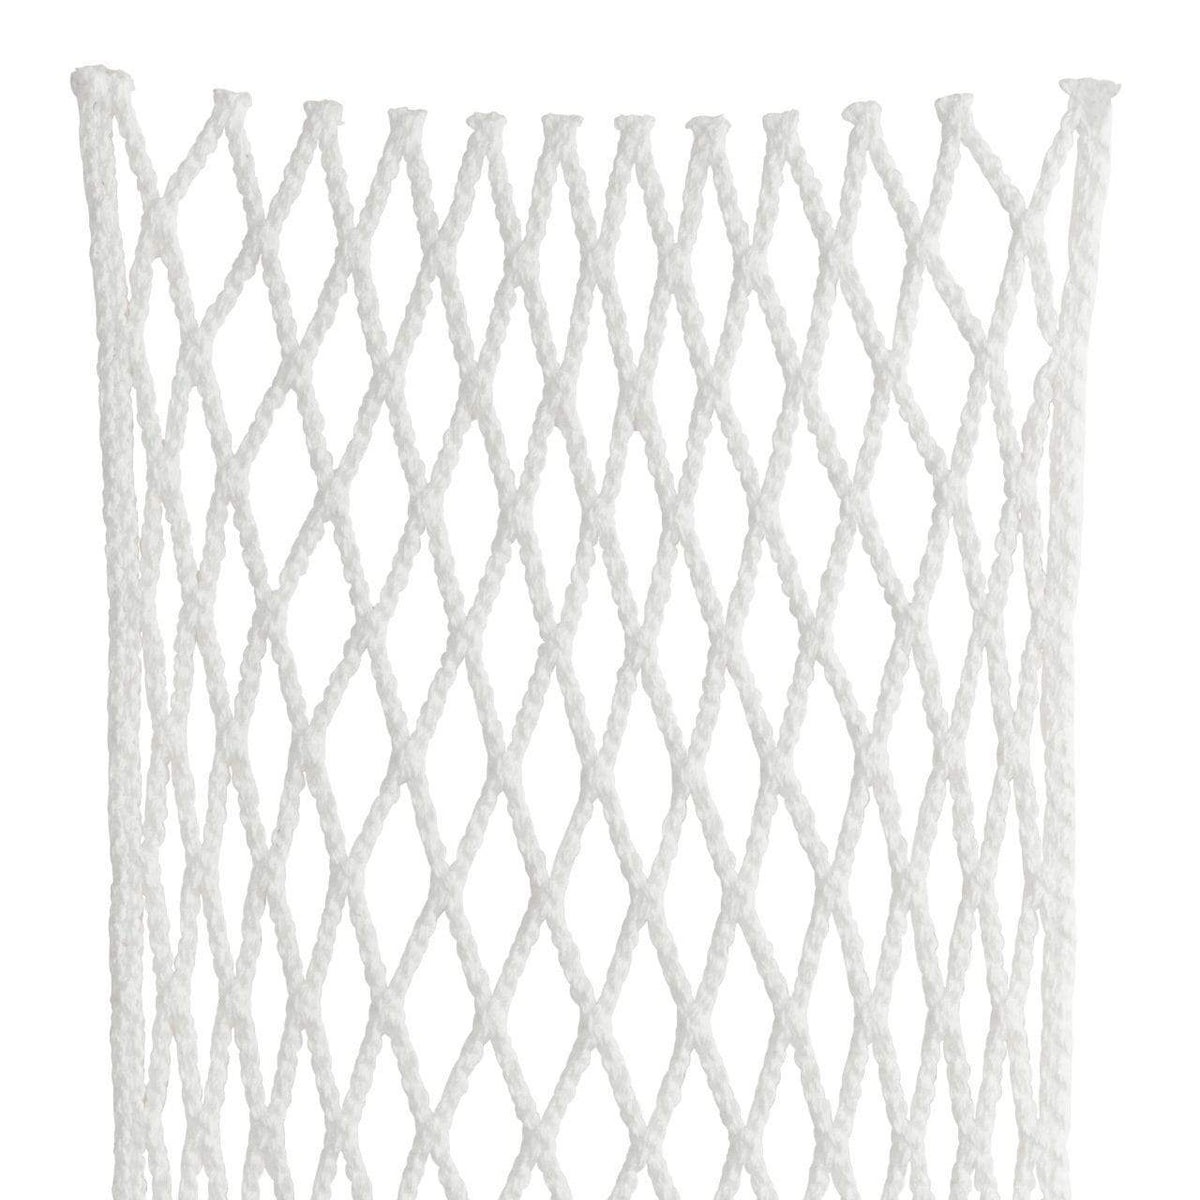 StringKing Grizzly 2s Goalie Lacrosse Mesh